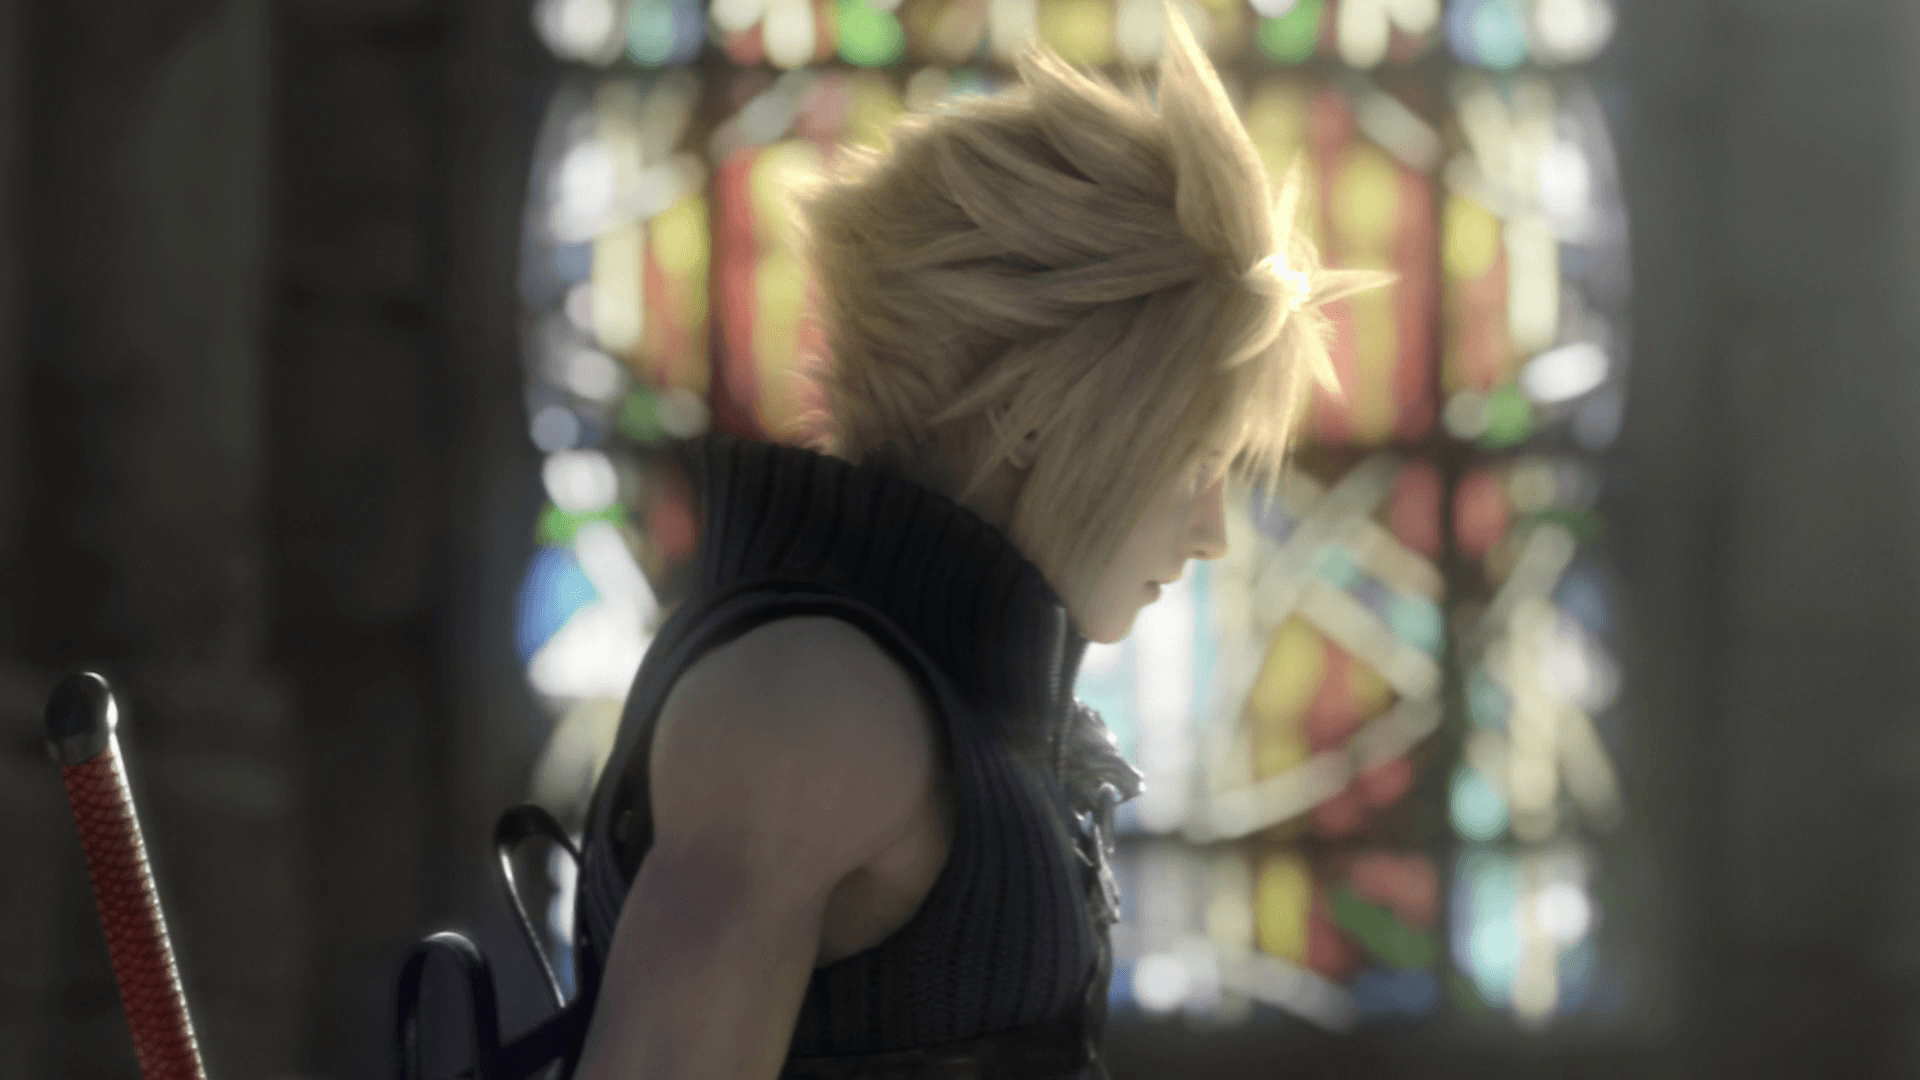 Final Fantasy VII: Advent Children Full HD Wallpaper and Background